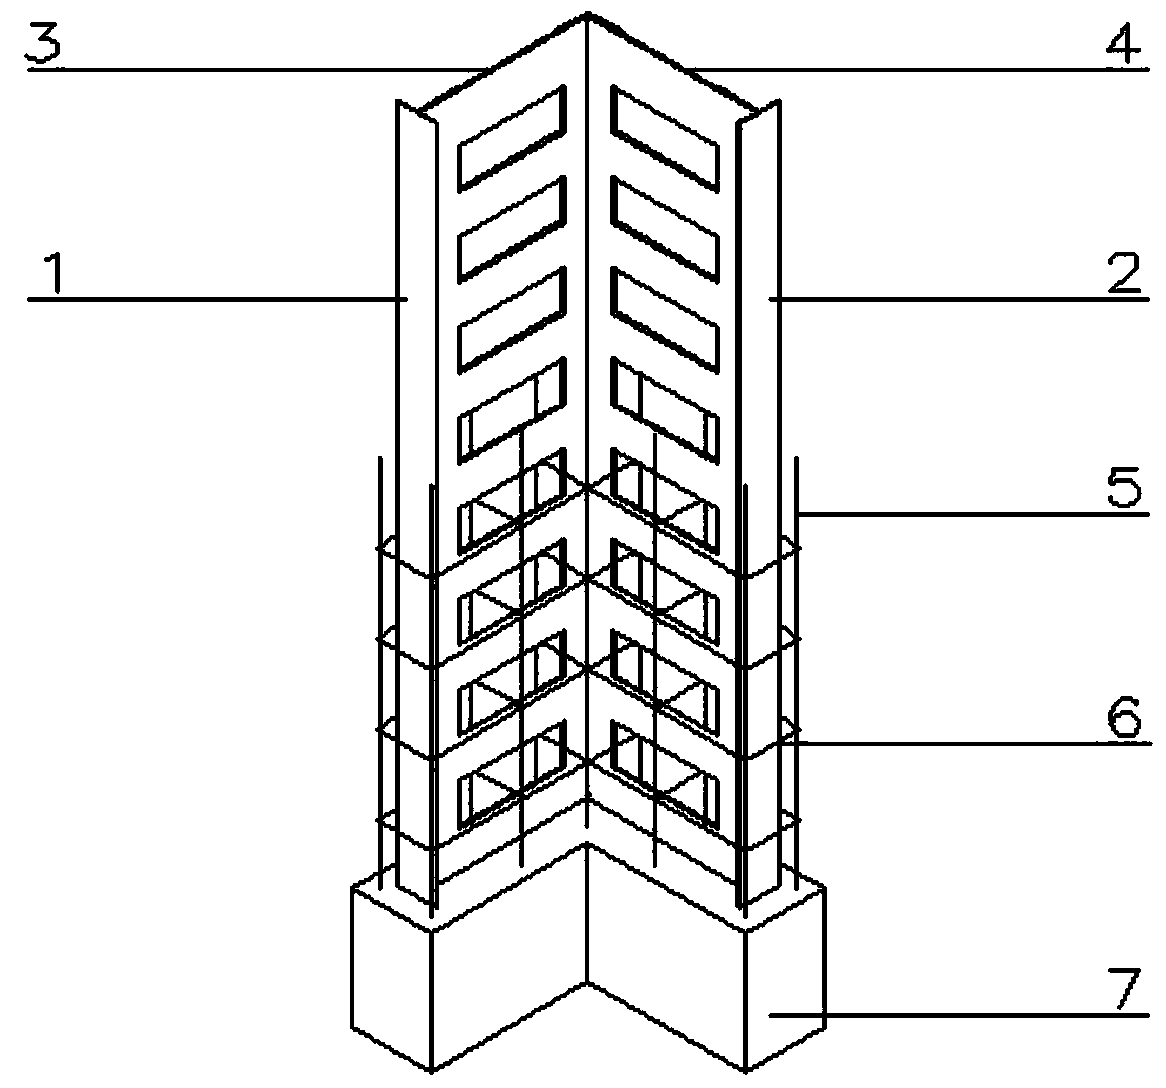 Steel-reinforced concrete specially-shaped column with L-shaped cross section and quadrangular holes in steel-reinforced webs